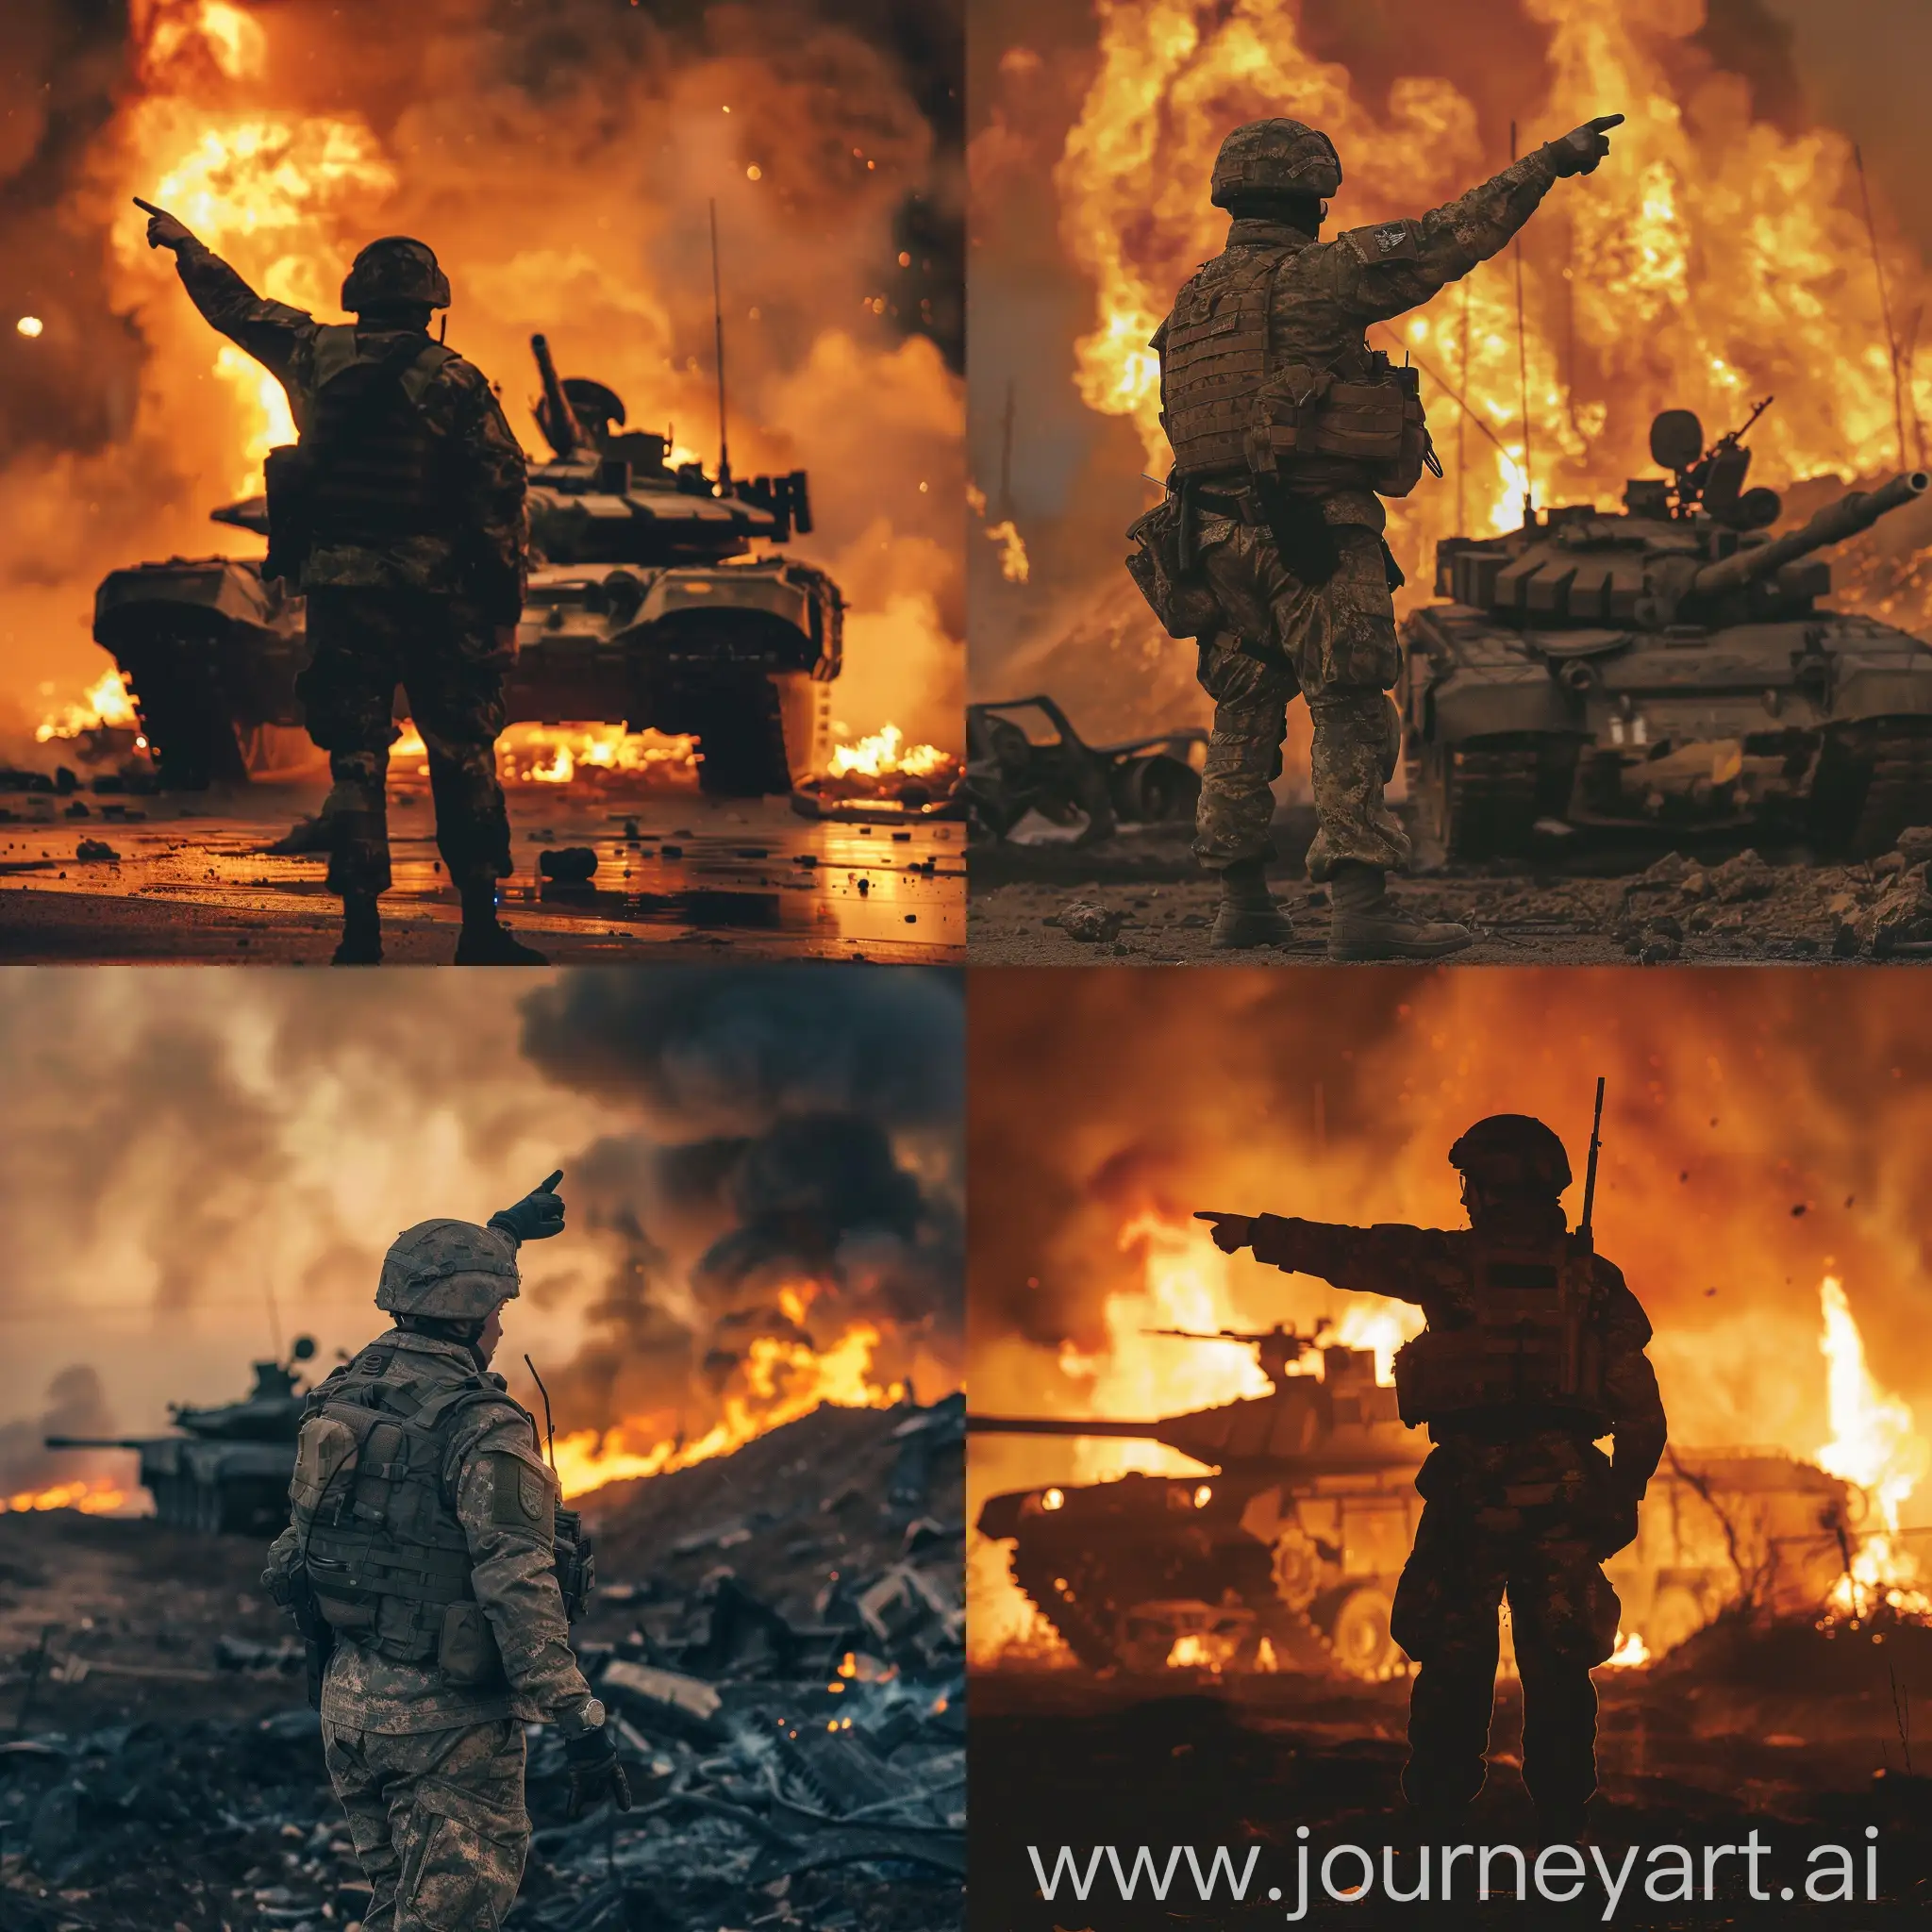 ealisic photo, a 1 russian military man stands against the background of a burning Abrams and points back